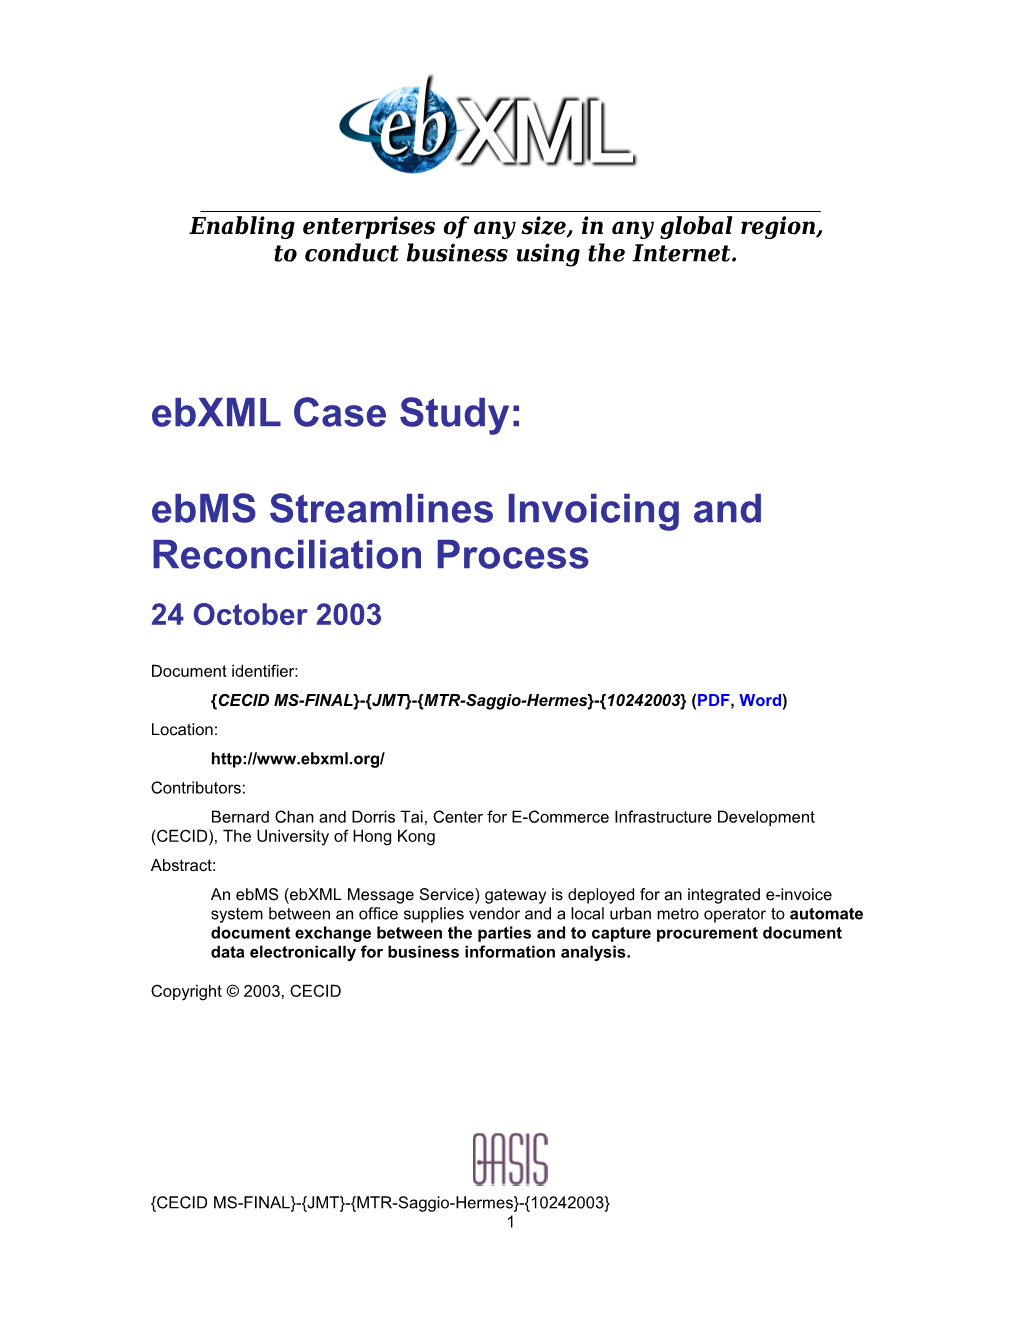 Ebms Streamlines Invoicing and Reconciliation Process